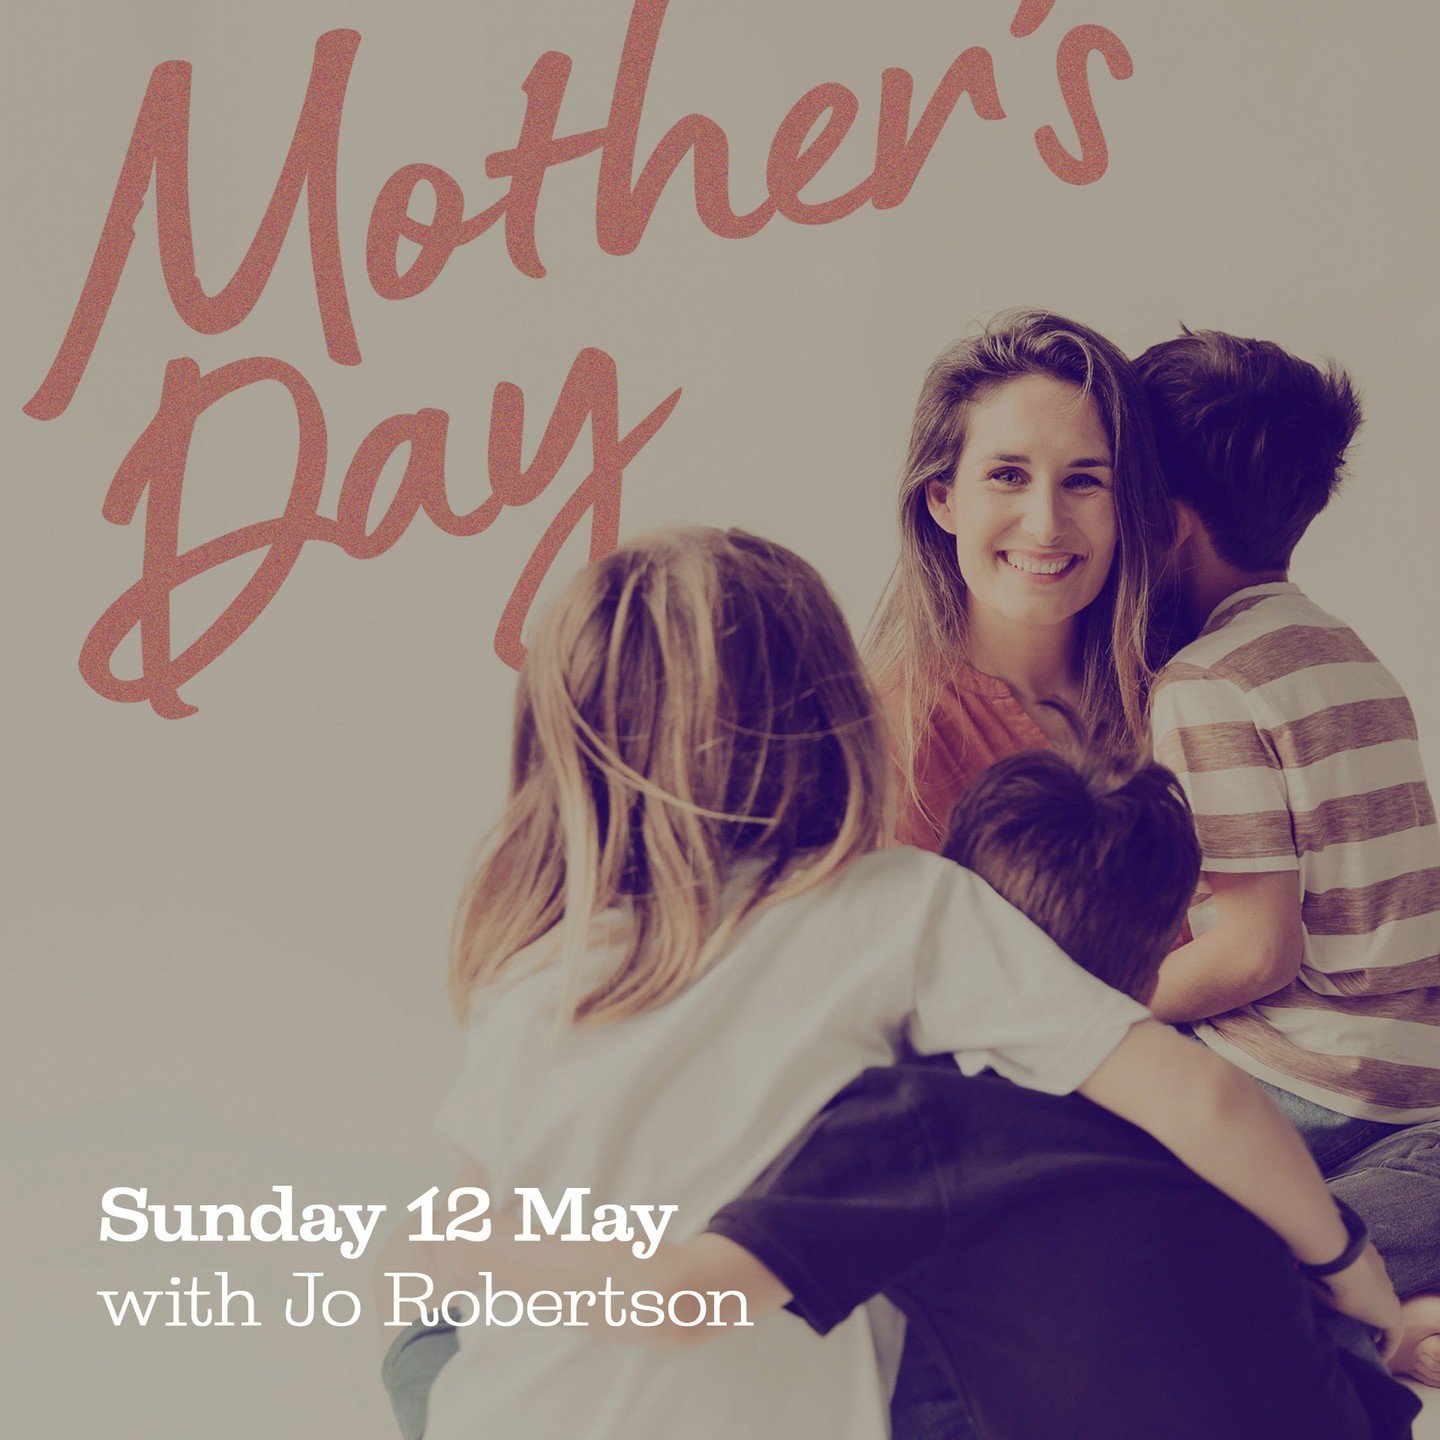 Coming Up! 

Tēnā koutou, this Mother's Day Sunday we're excited to have the one and only Jo Robertson sharing with us! Jo is a therapist, educator, researcher, and mother. She is married to Dave, and together they have three wonderful boys, Jack, Be